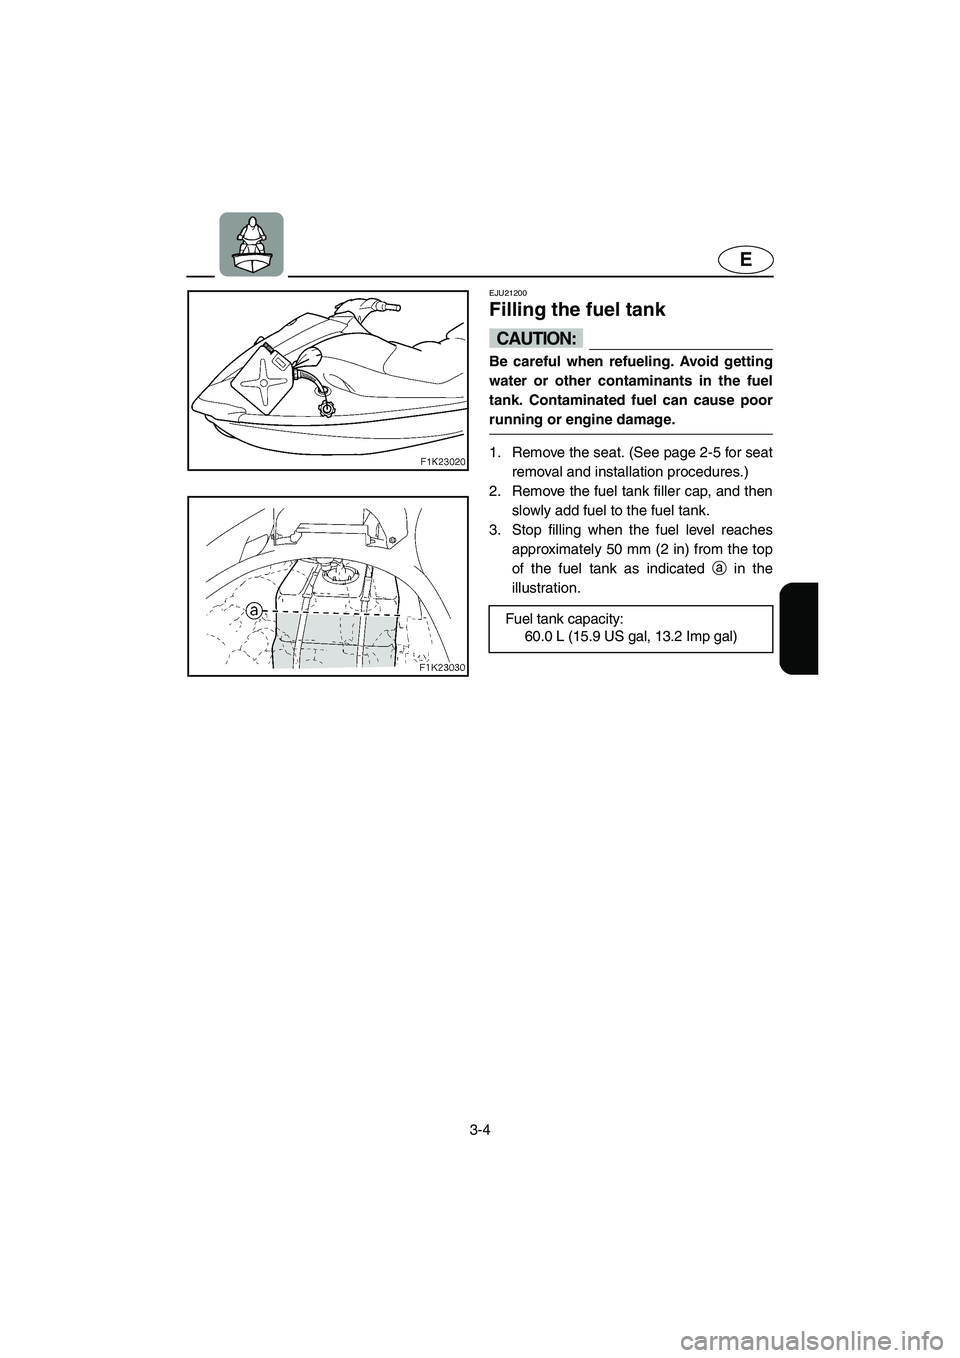 YAMAHA VX 2006  Owners Manual 3-4
E
EJU21200 
Filling the fuel tank 
CAUTION:@ Be careful when refueling. Avoid getting
water or other contaminants in the fuel
tank. Contaminated fuel can cause poor
running or engine damage. 
@
1.